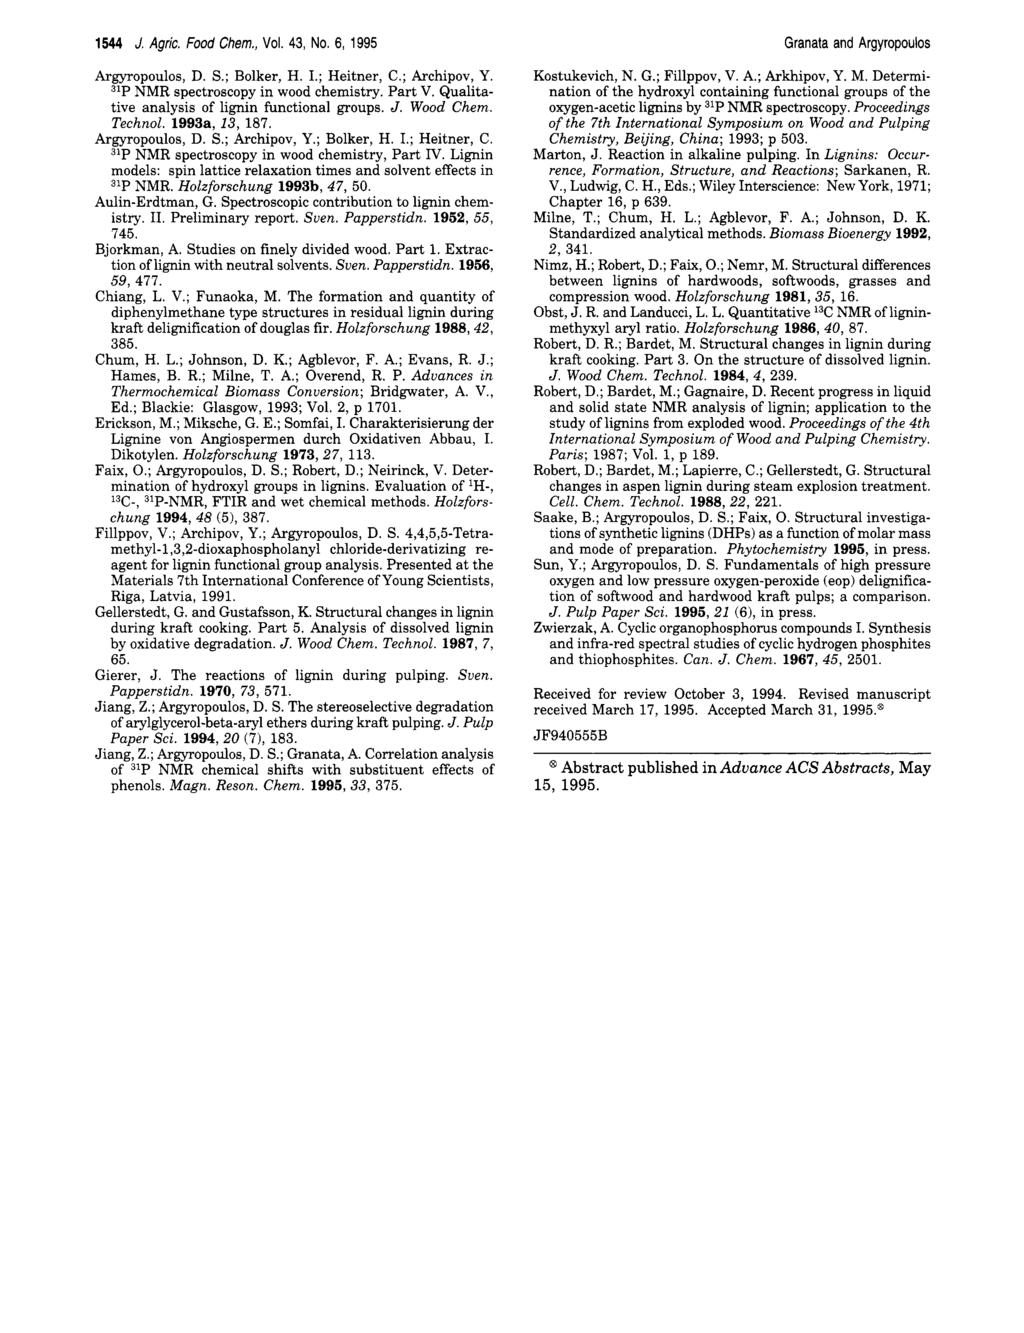 1544 J. Agric. Food Chem., Vol. 43, No. 6, 1995 Granata and Argyropoulos Argyropoulos, D. S.; Bolker, H. I.; Heitner, C.; Archipov, Y. 31P NMR spectroscopy in wood chemistry. Part V.